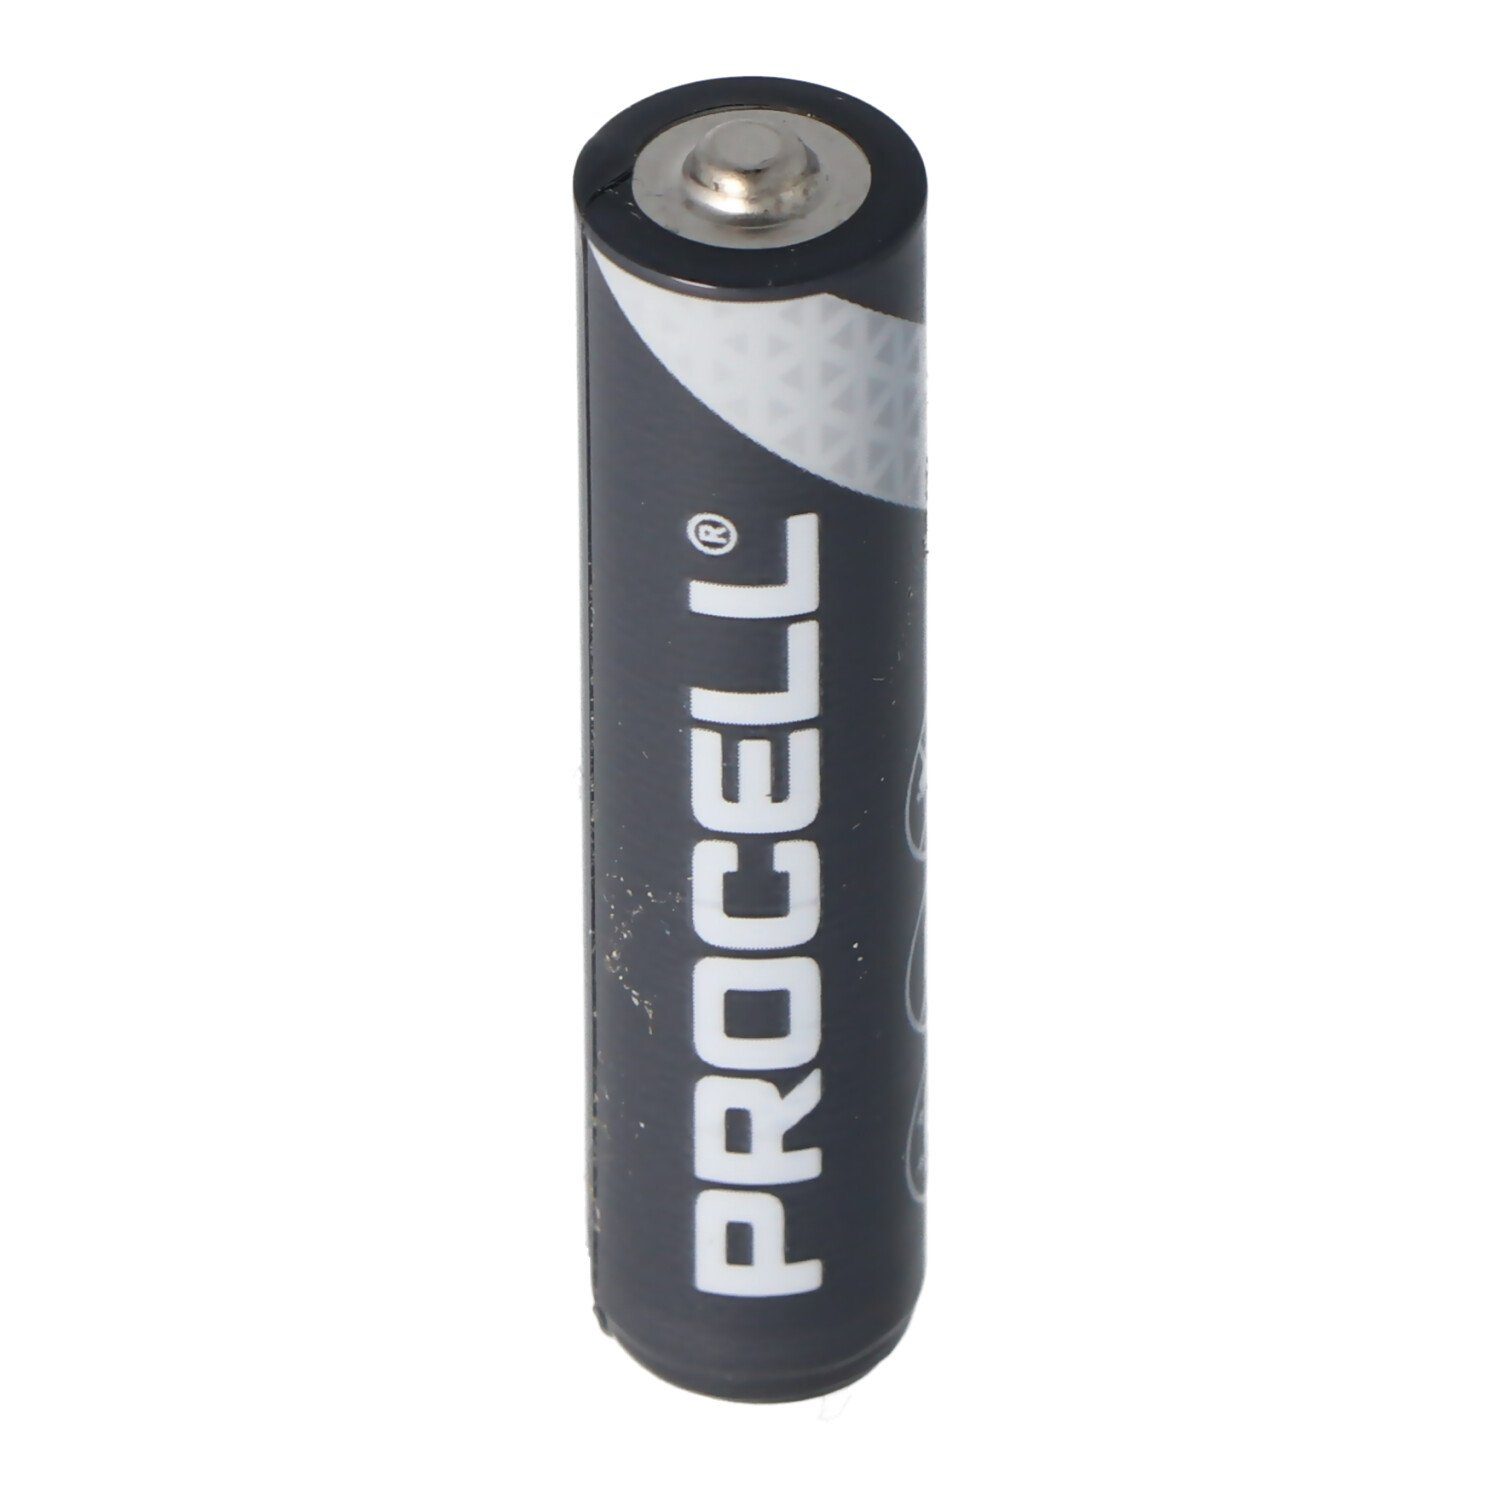 Duracell Duracell Procell Alkaline AAA Micro, LR03 lose Ware 1 Stück Batterie, (1,5 V)